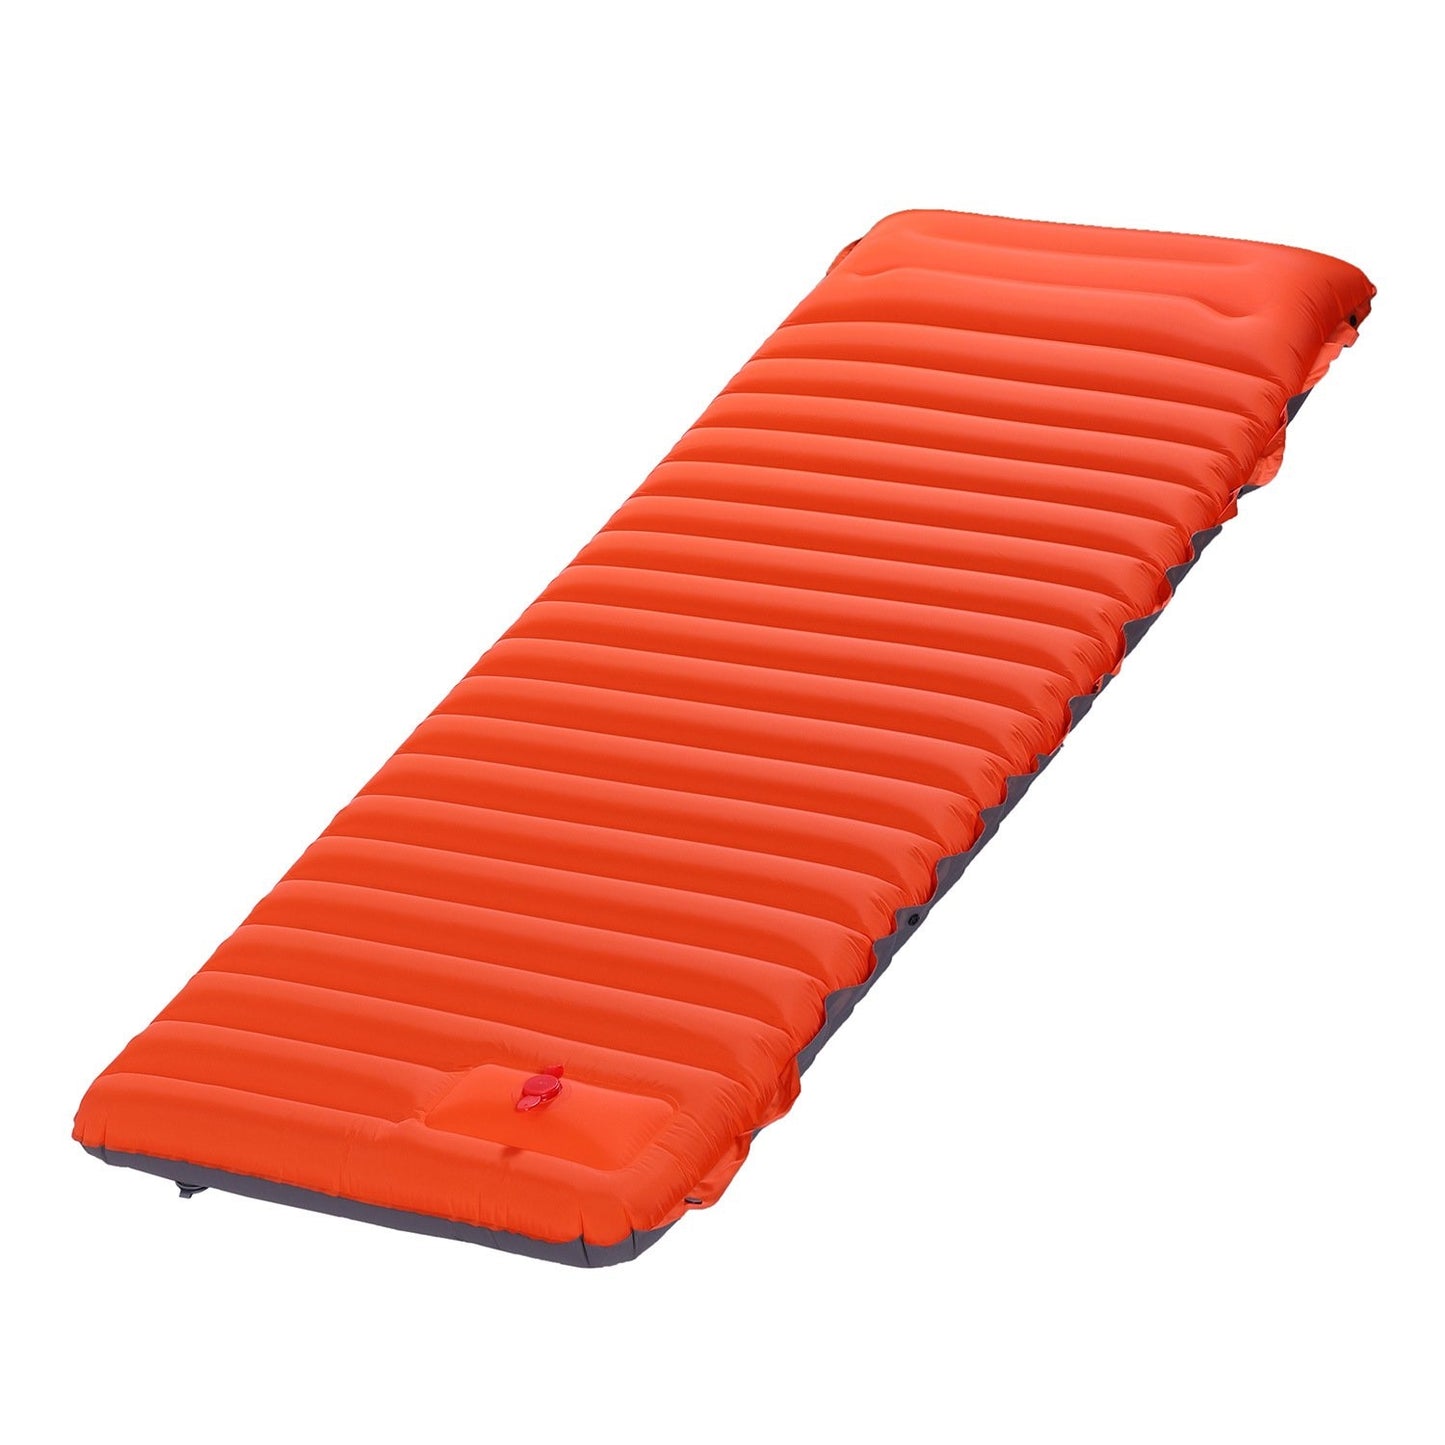 Outdoor Inflatable Bed Camping Picnic Foot Type Automatic Inflatable Mattress